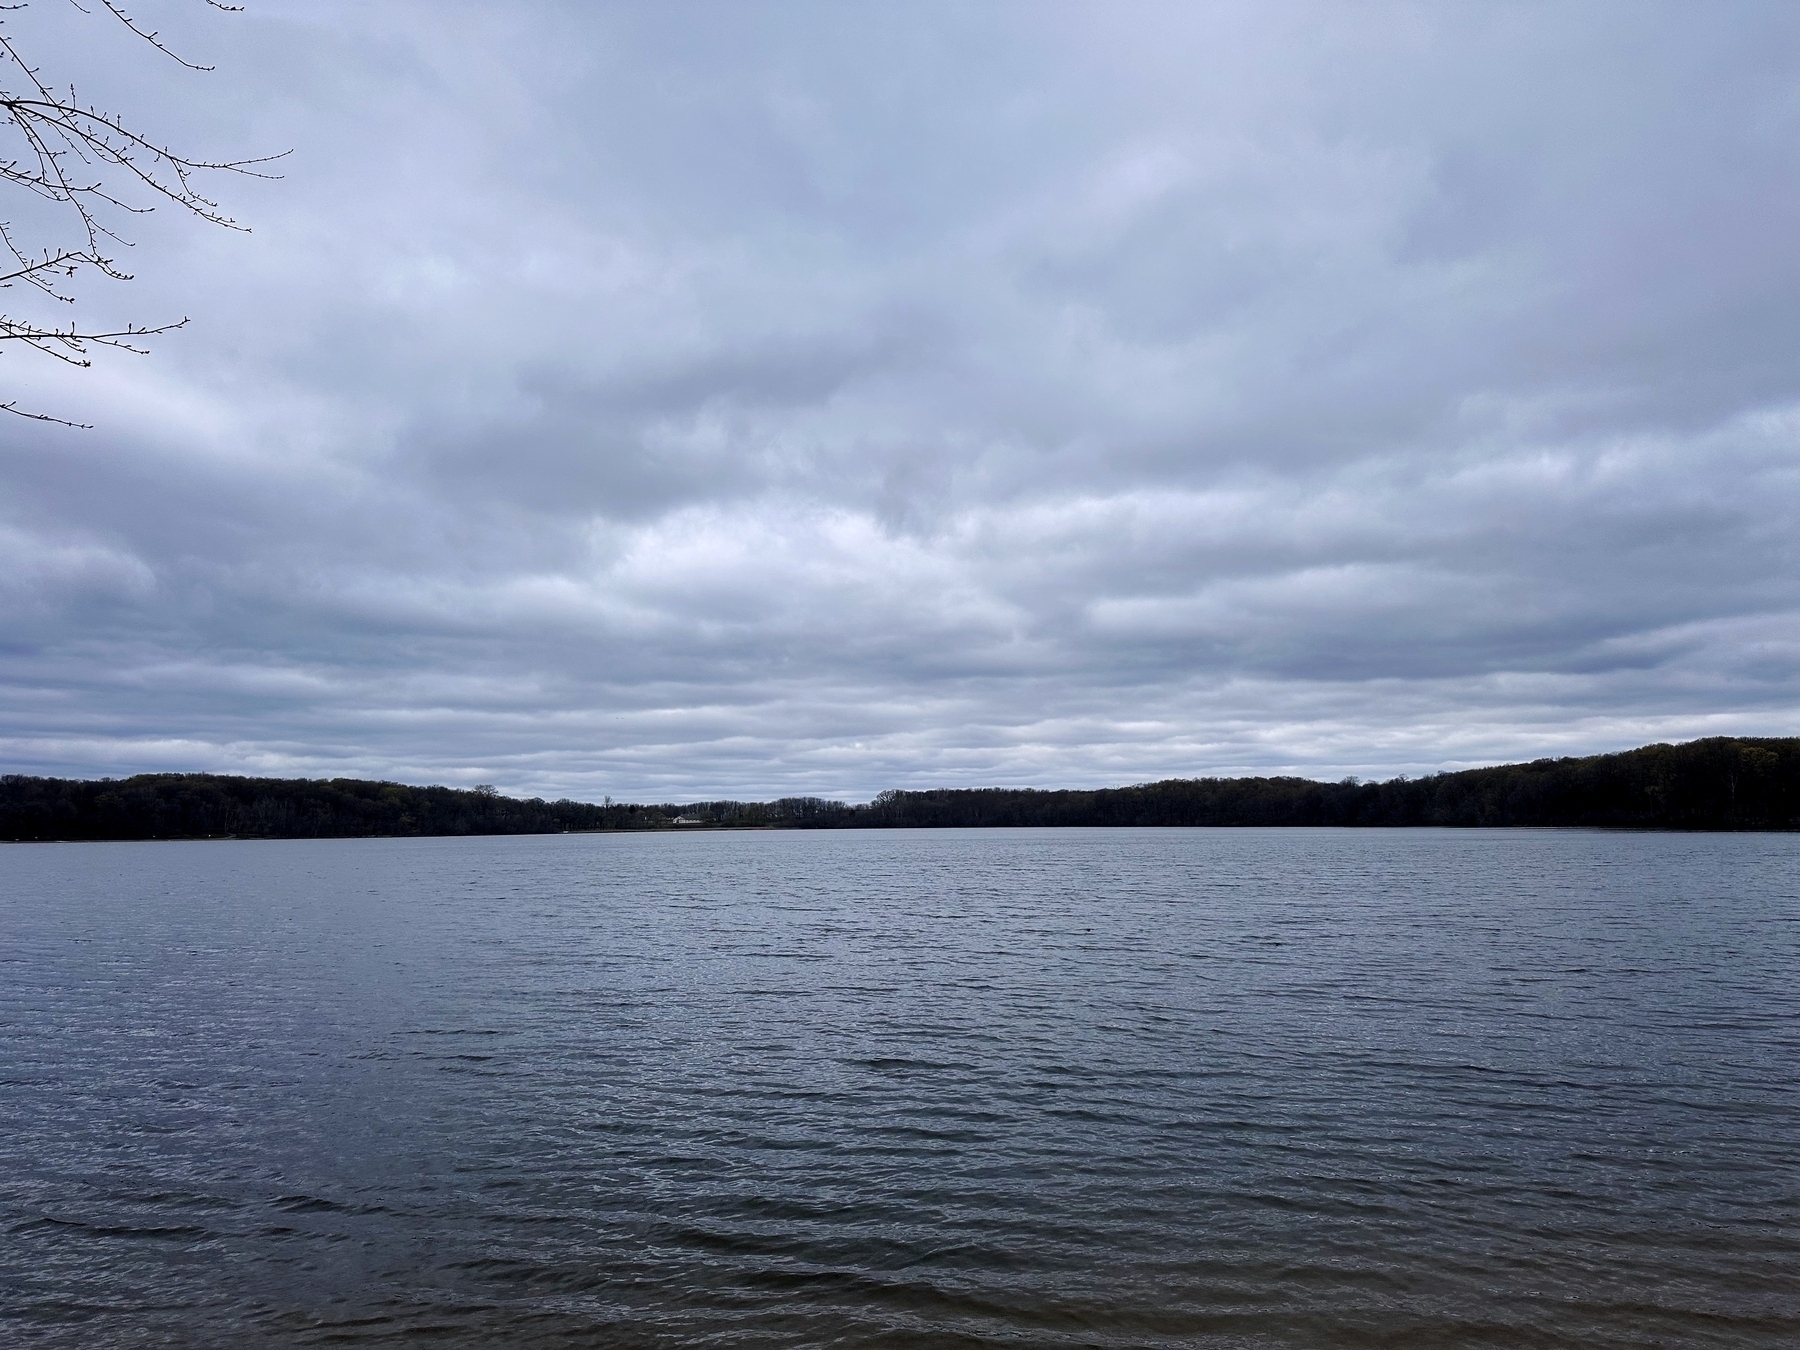 A placid lake under an overcast sky, bordered by distant trees, conveys a serene, expansive outdoor scene.